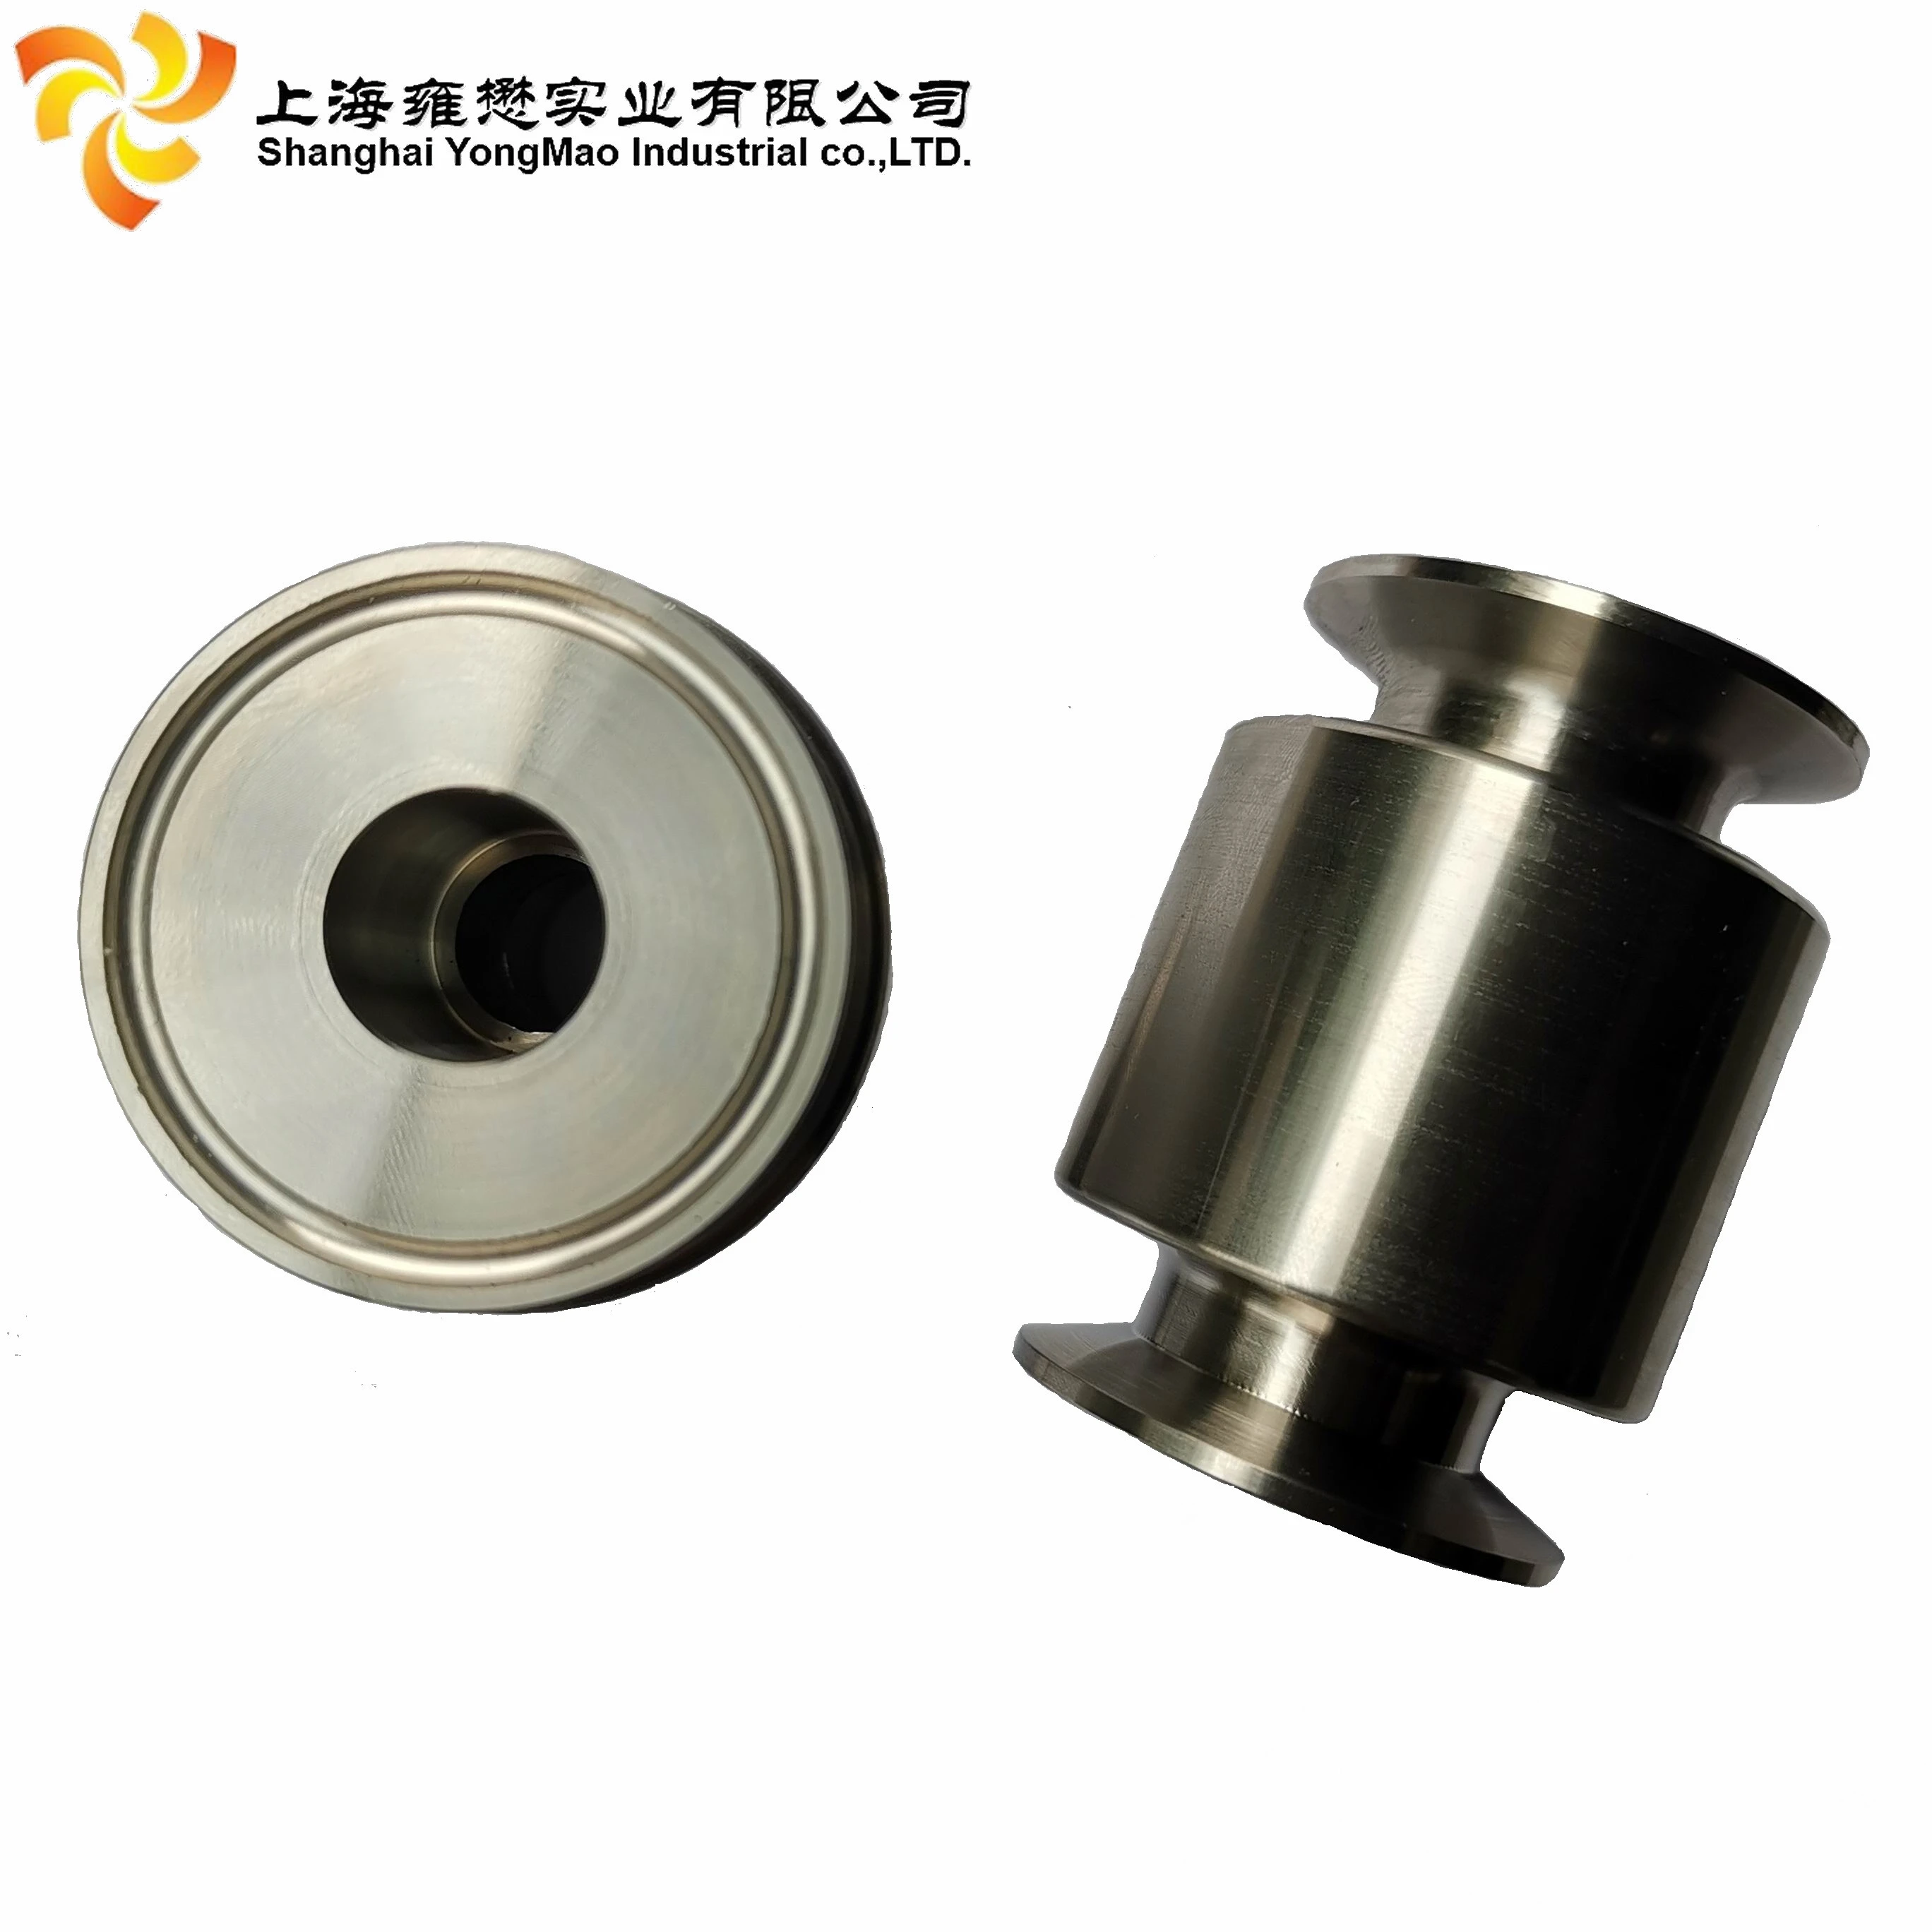 Customized turning of stainless steel parts    Customized Copper Machinery Parts Lathe Processing